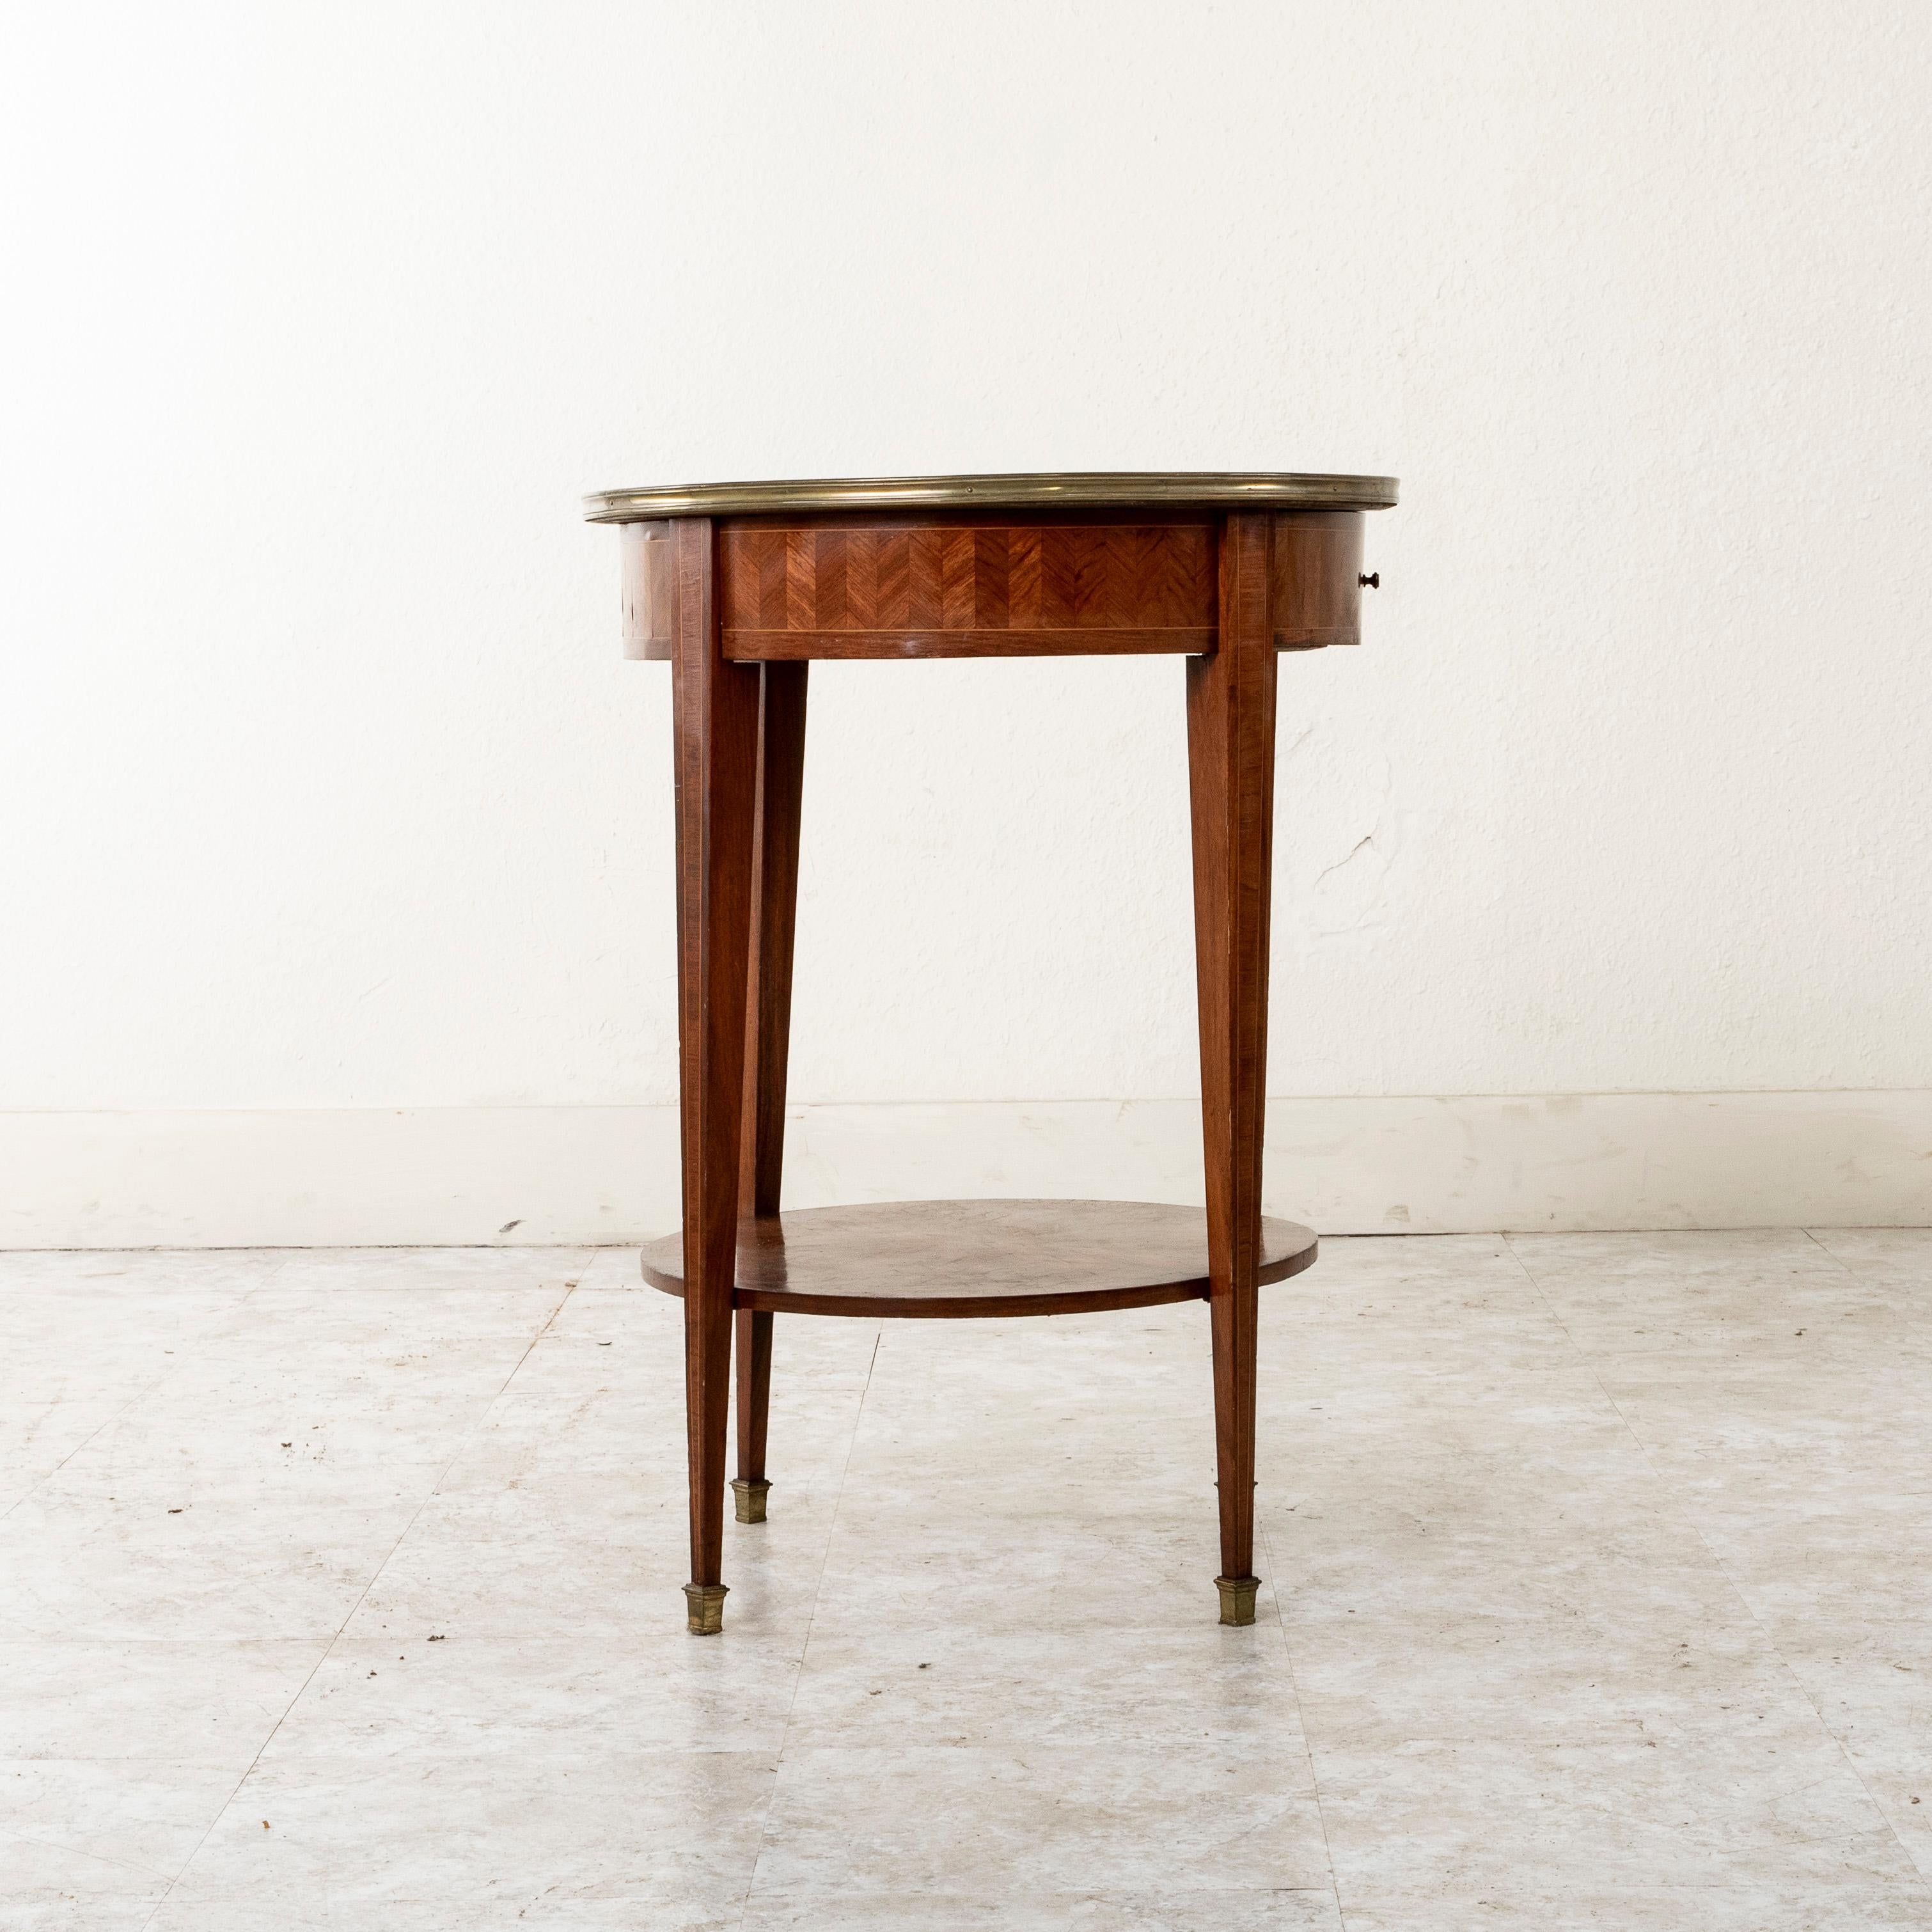 Late 19th Century French Louis XVI Style Rosewood Marquetry Gueridon Side Table For Sale 2